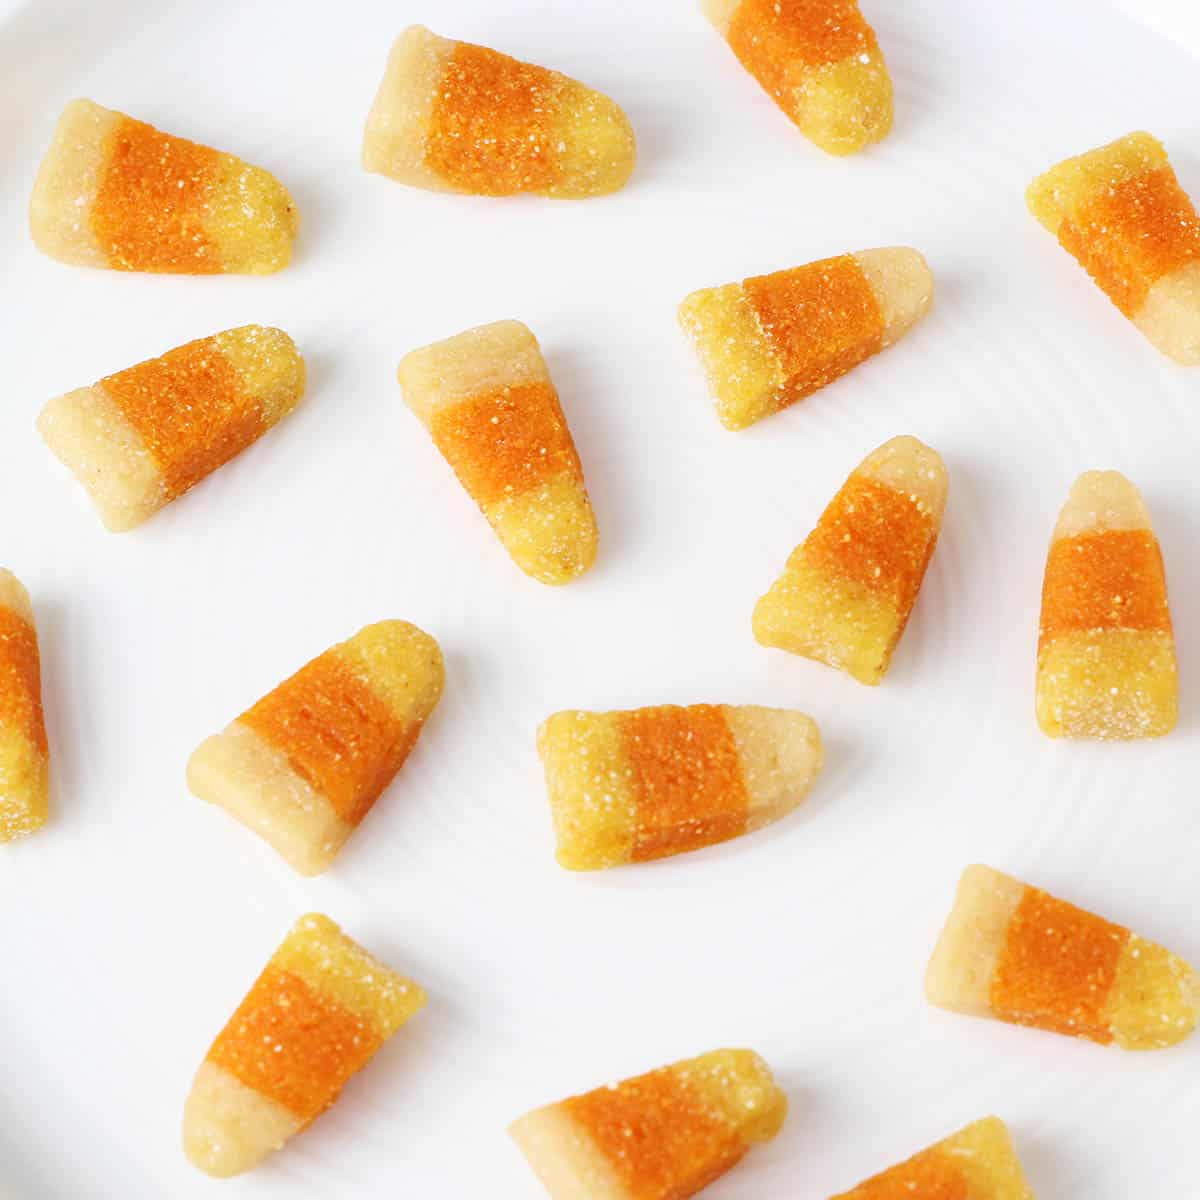 sixteen pieces of protein candy corn spread out on a white plate